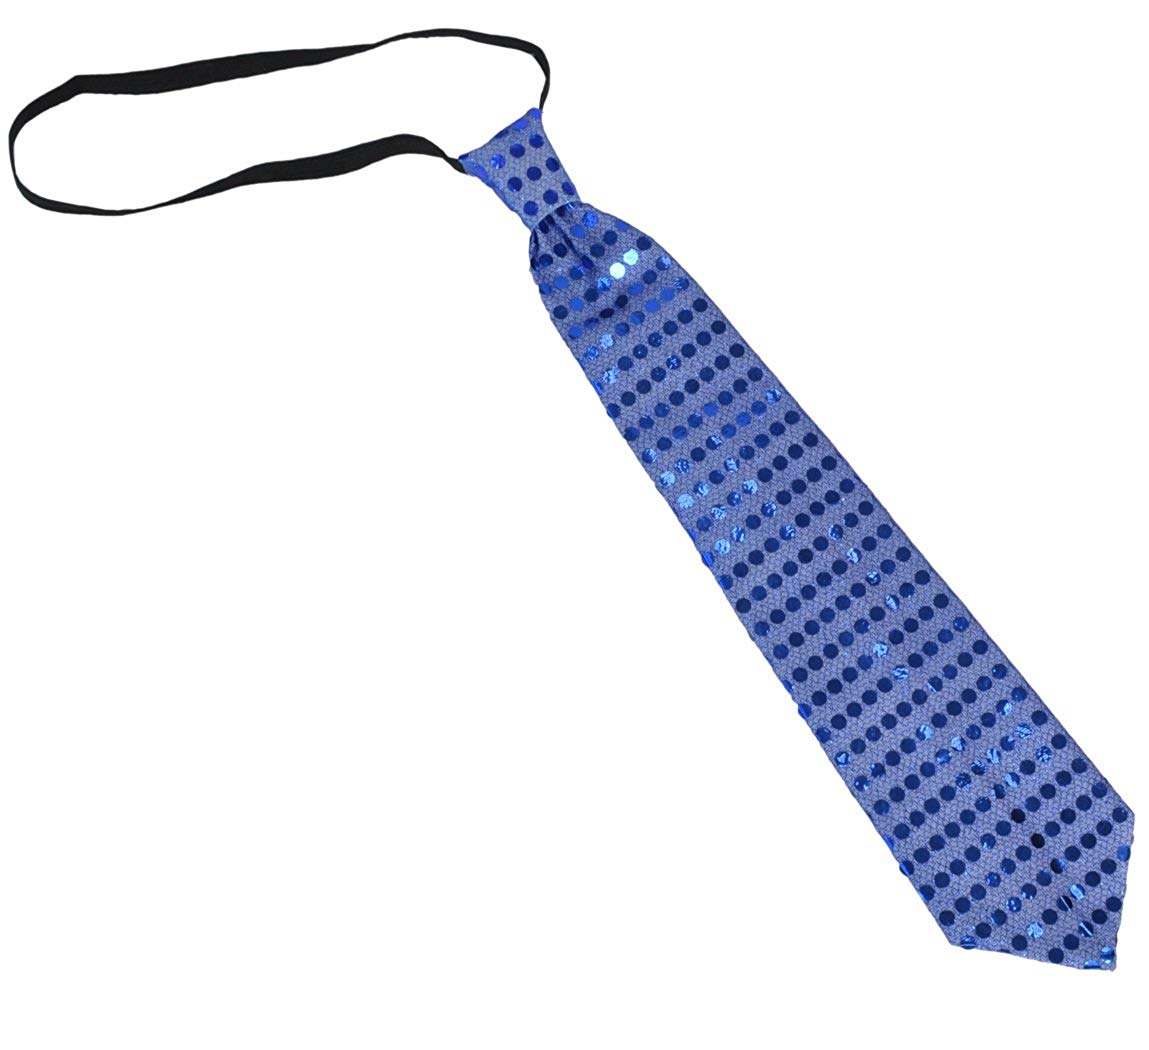 Light Up Neckties LED Funny Sequin Neck Ties Novelty Blinking Party Toy